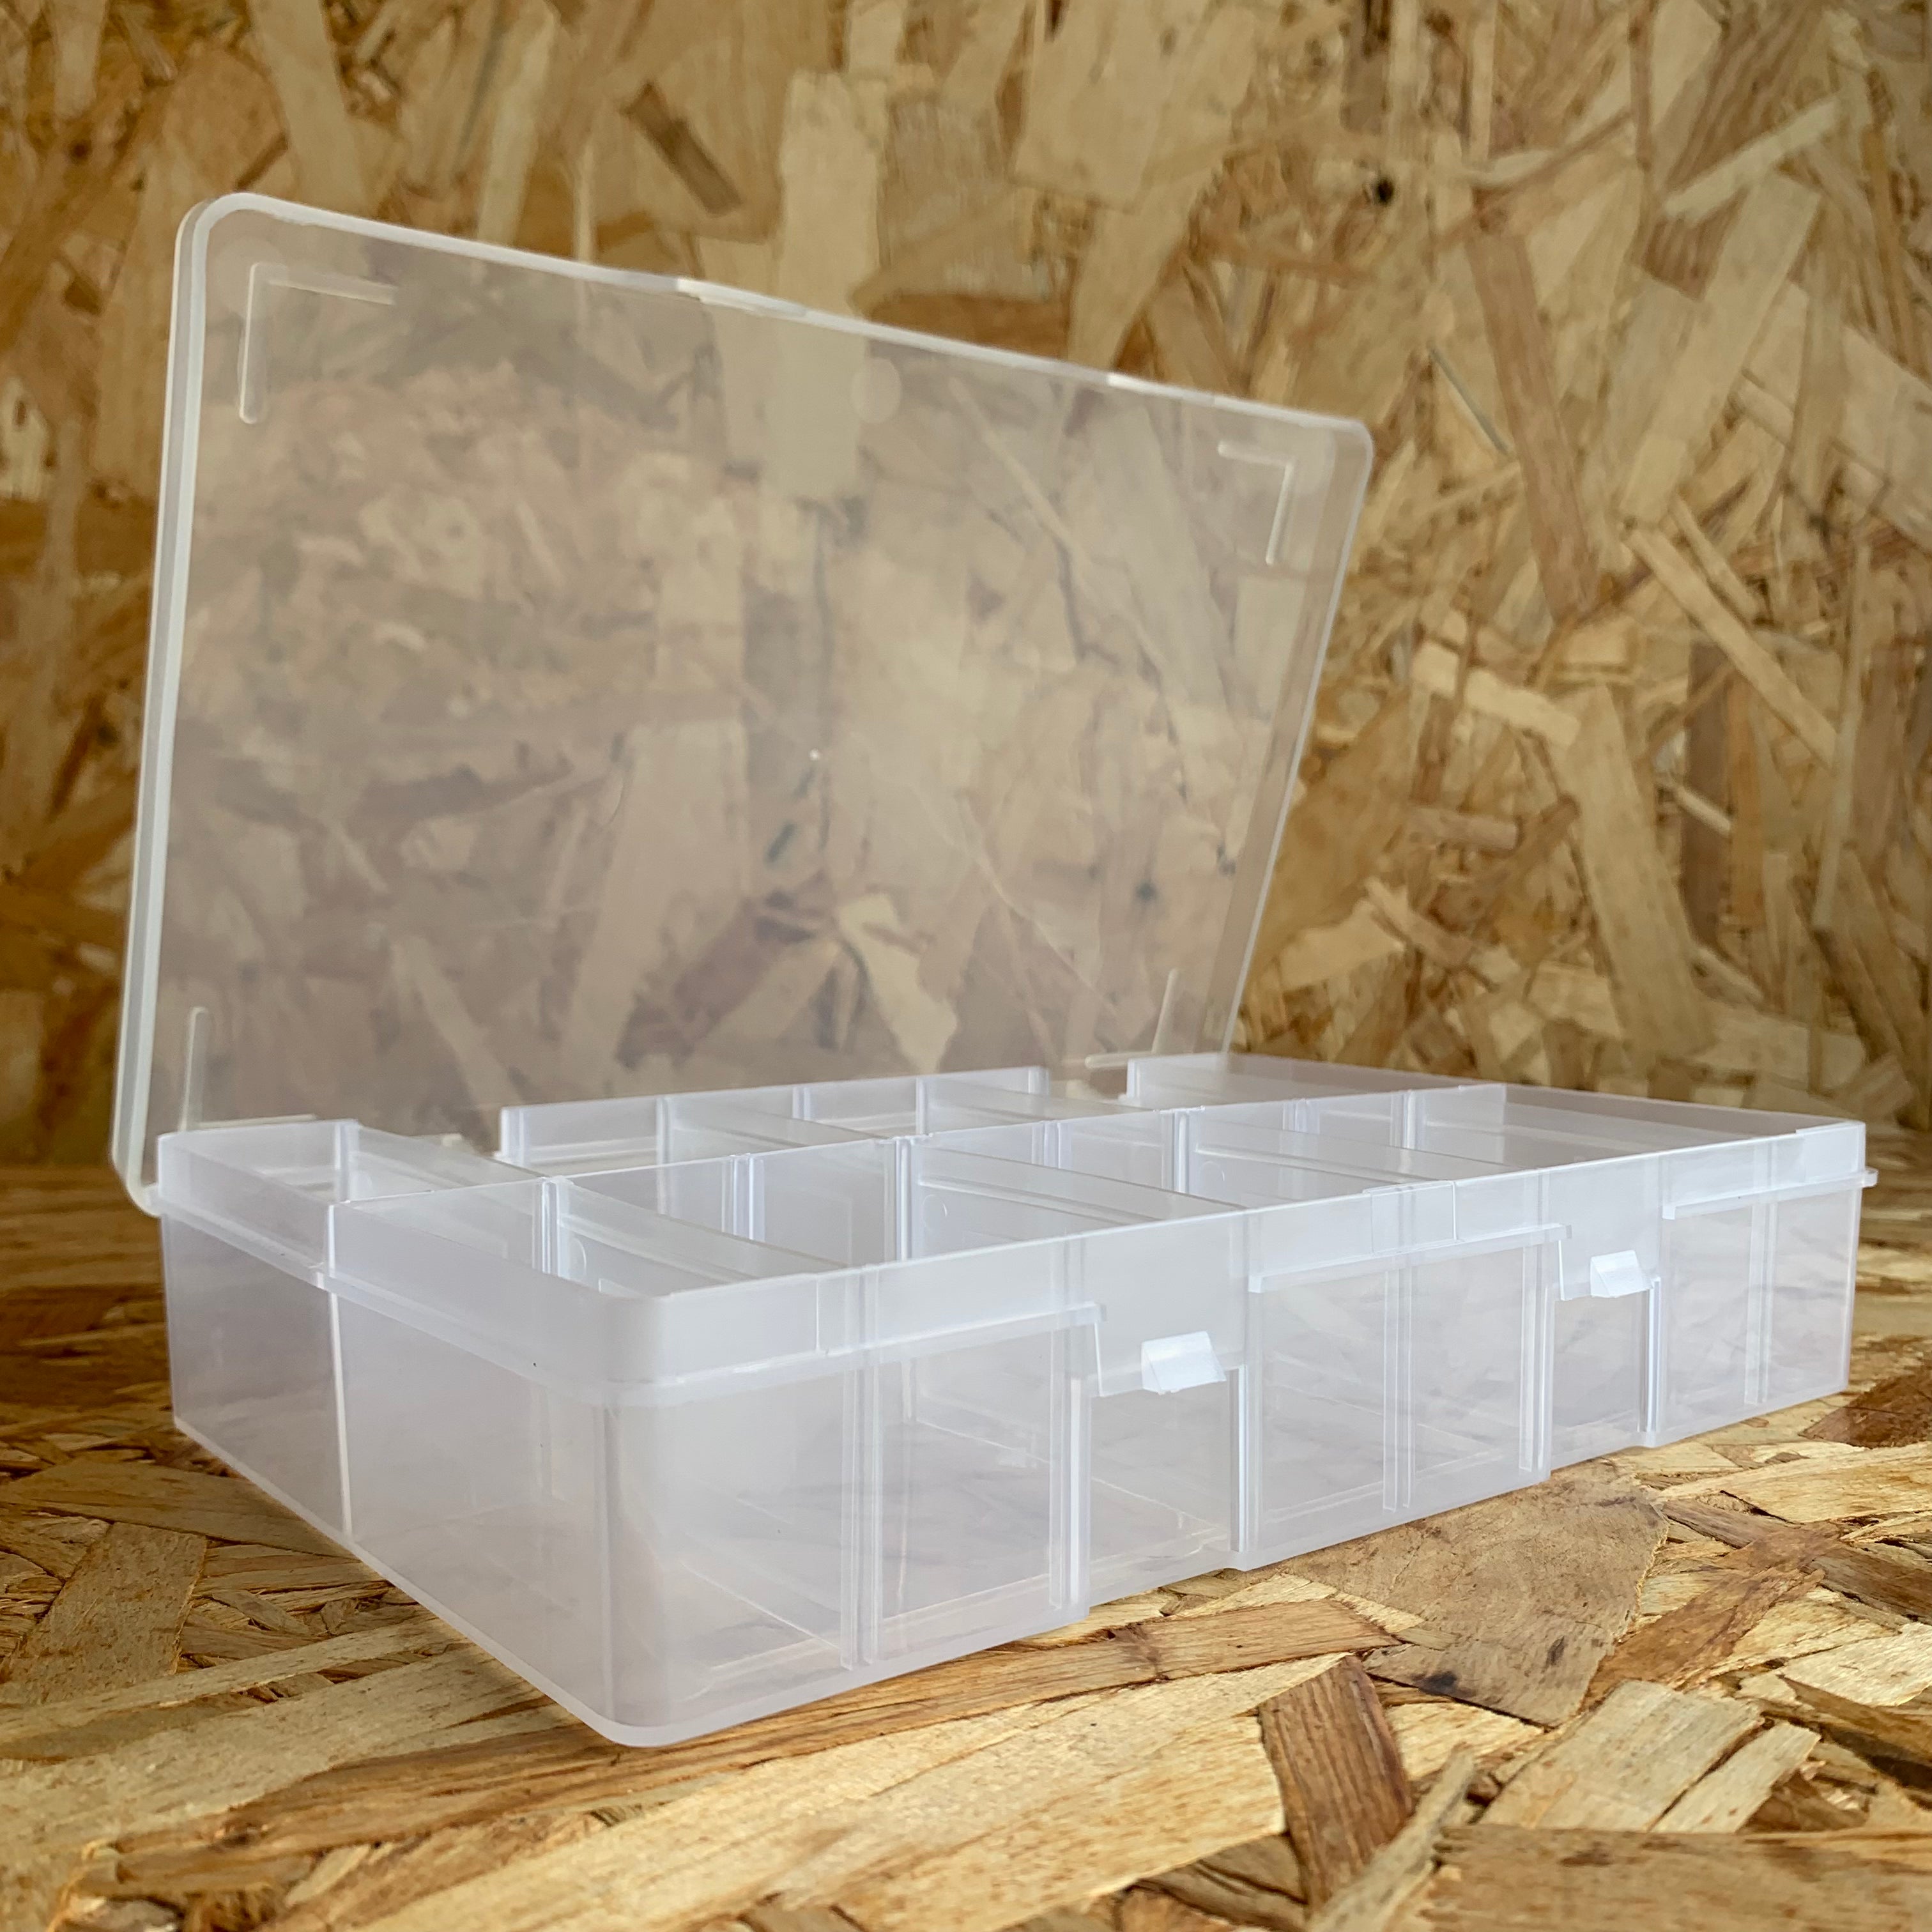 Buy Plastic Box with Hinged Lid & Dividers Wholesale & Retail